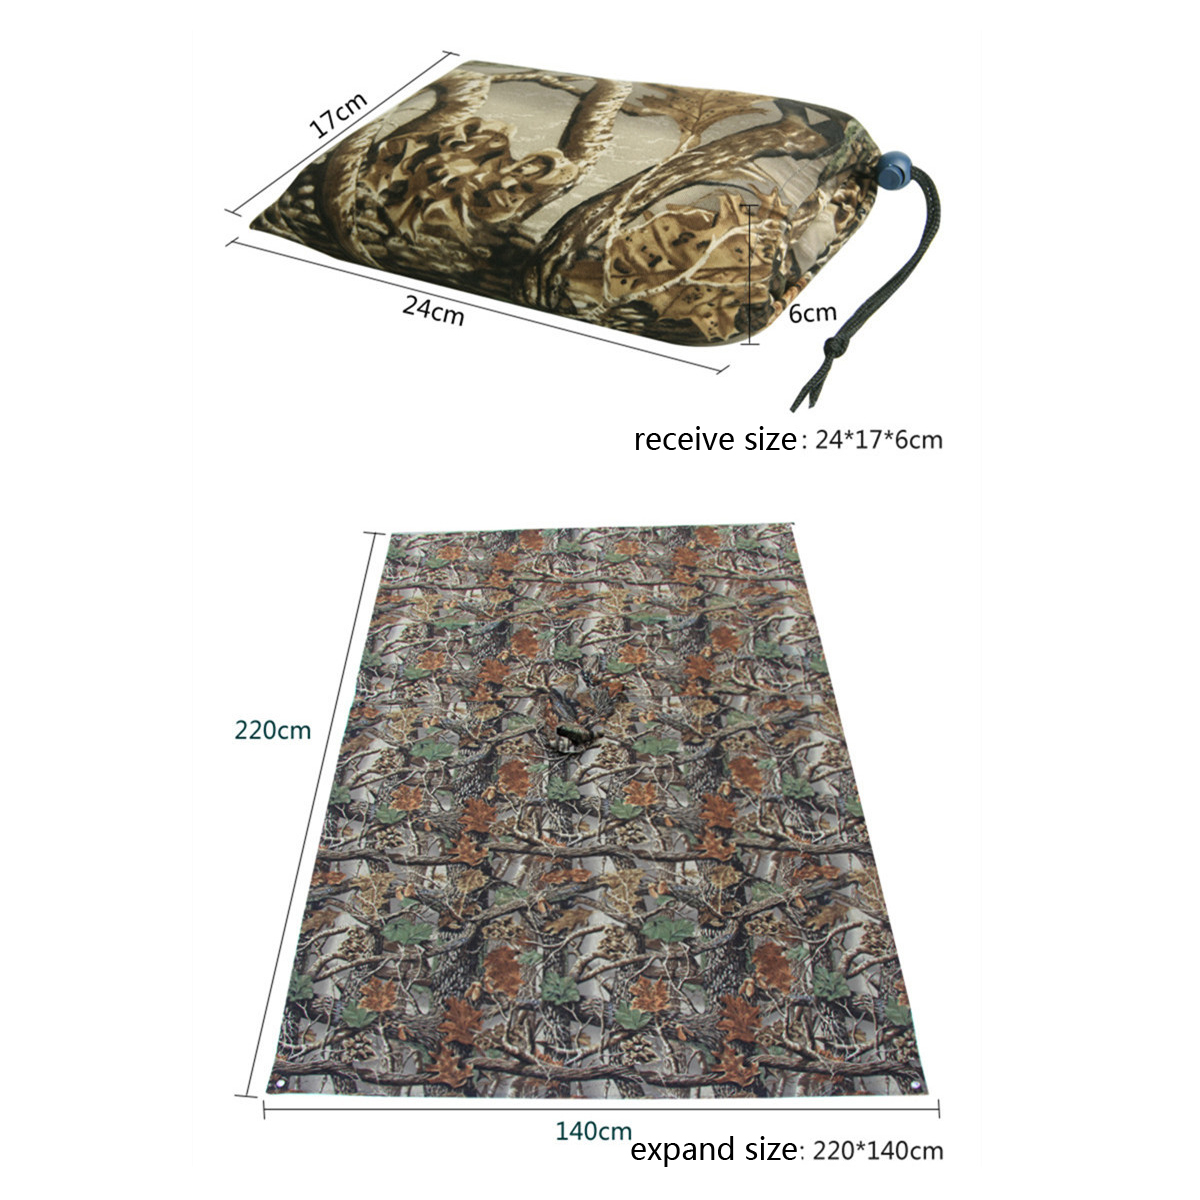 3-In-1-Multifunctional-Raincoat-Poncho-Backpack-Camouflage-Rain-Cover-Awning-Tent-Rainning-Clothing-1454553